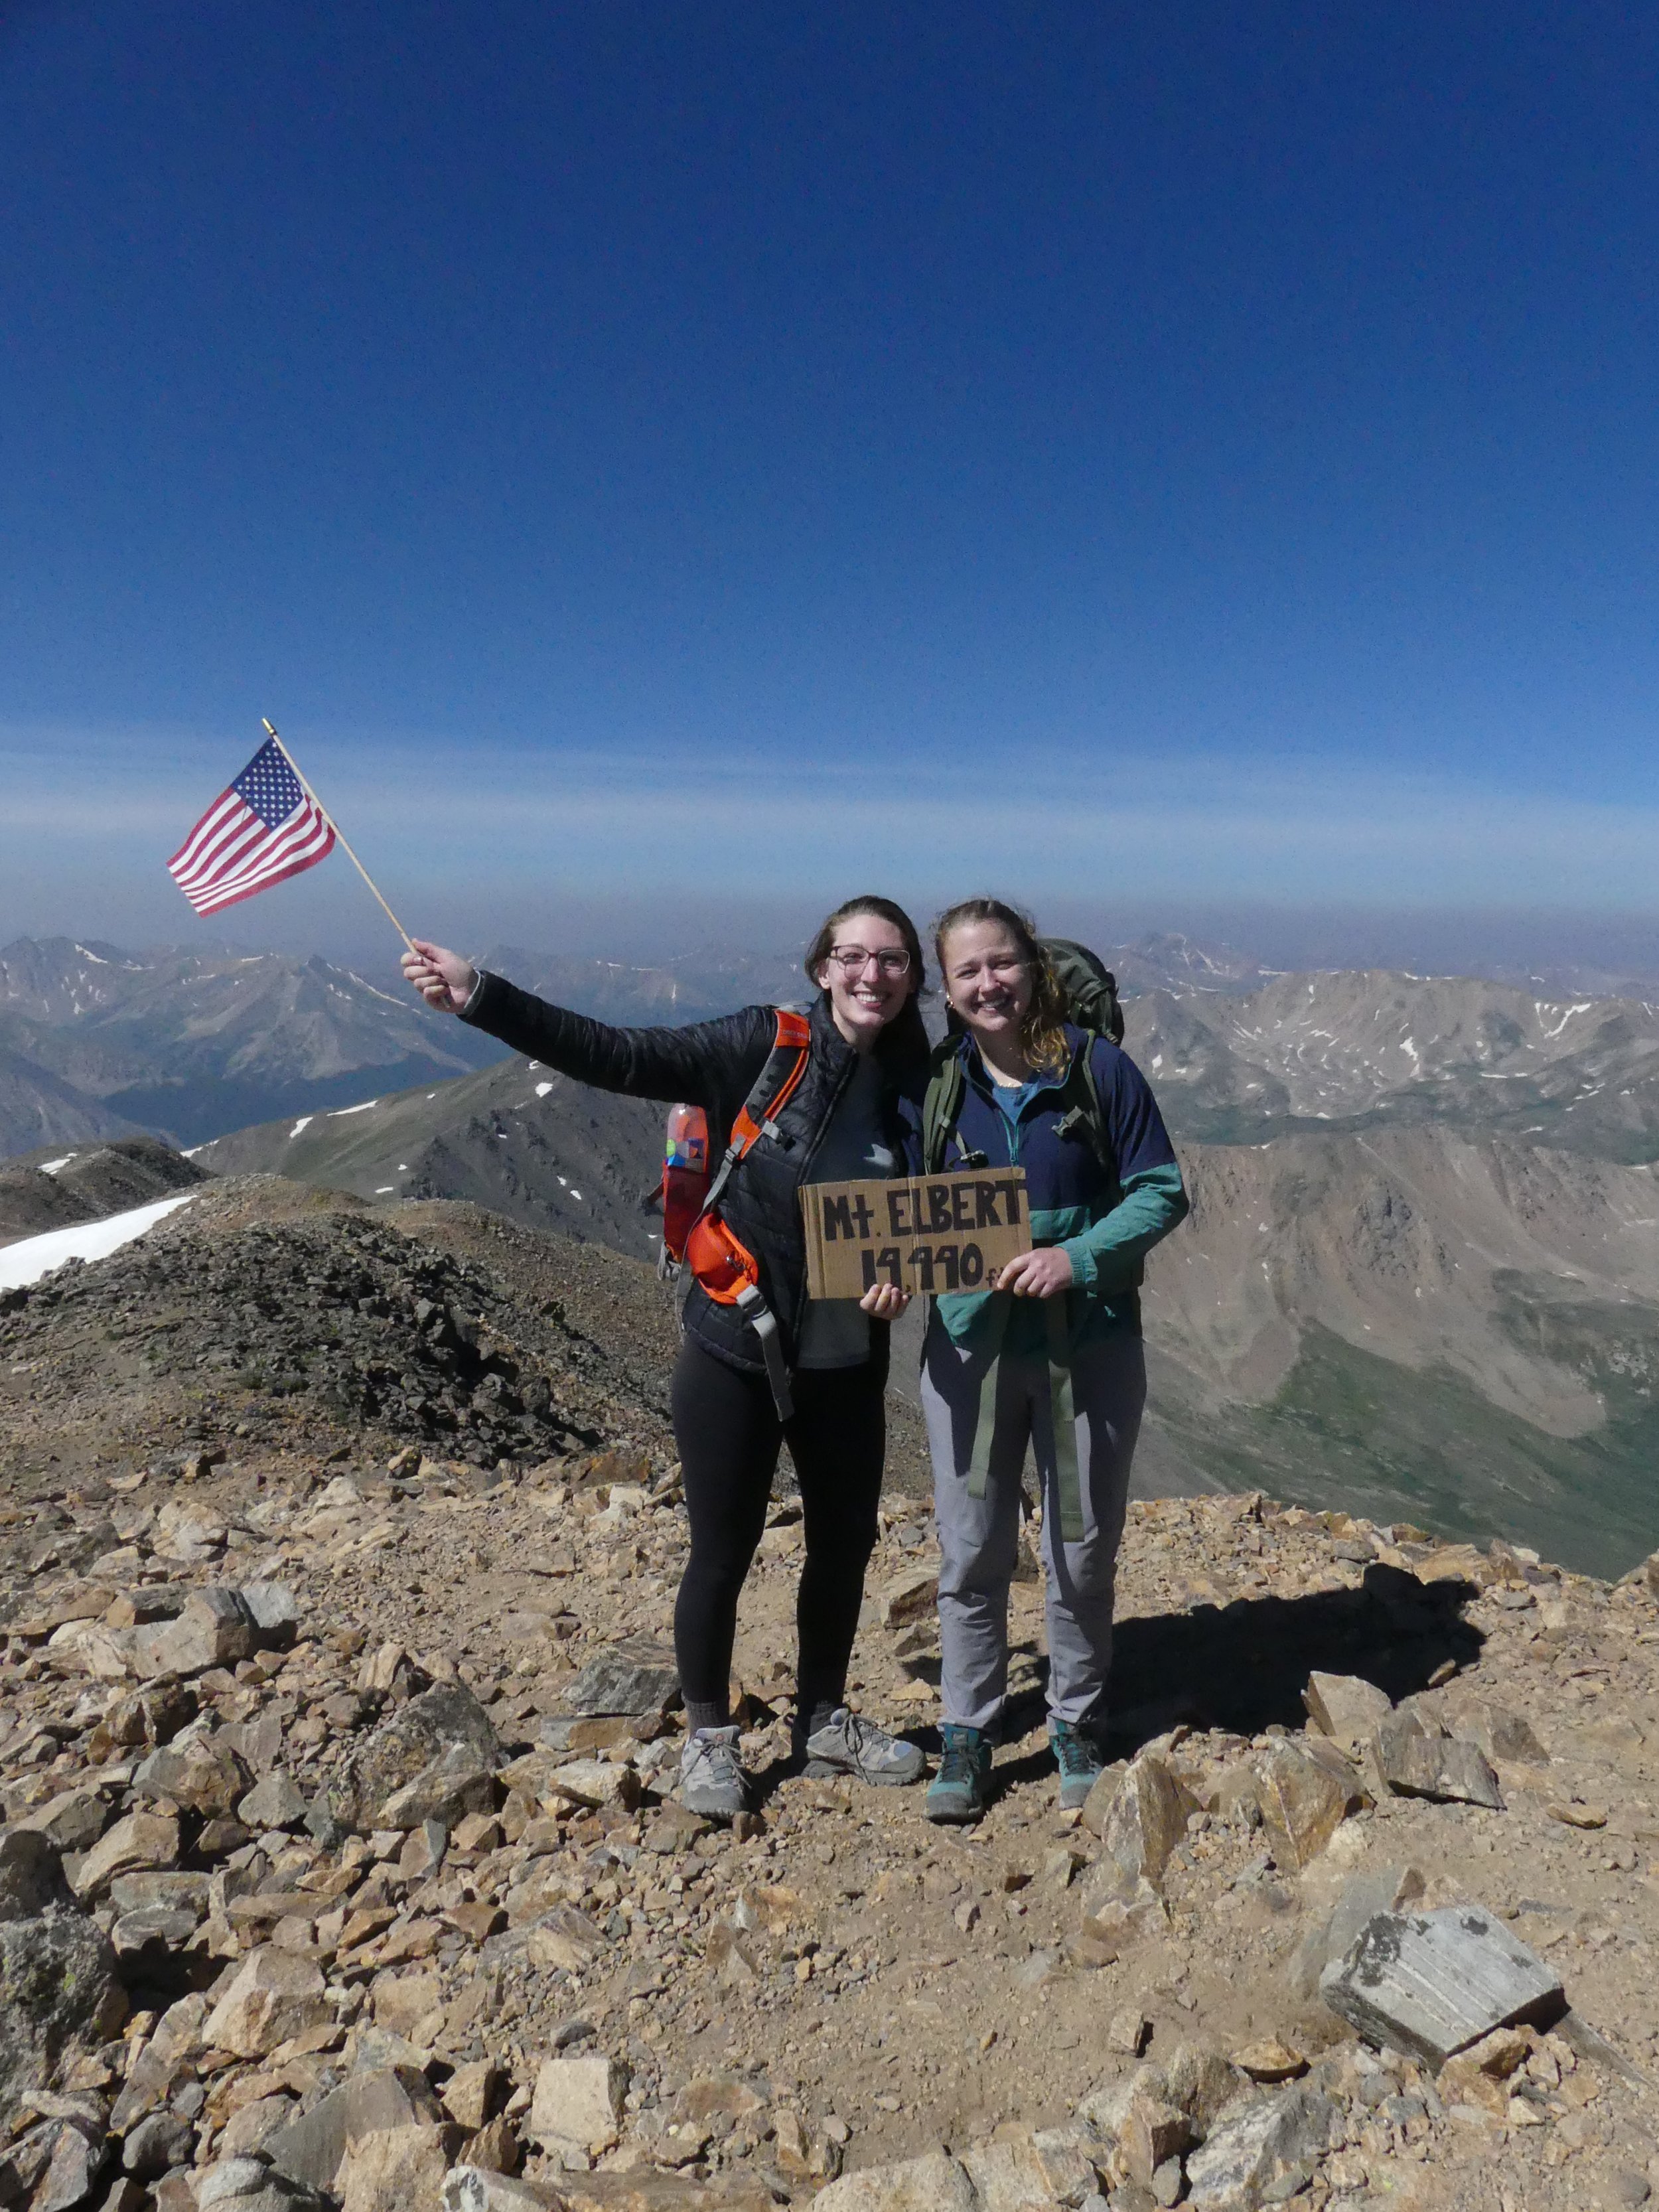  Katie and Taylor at the summit of Mt. Elbert.  